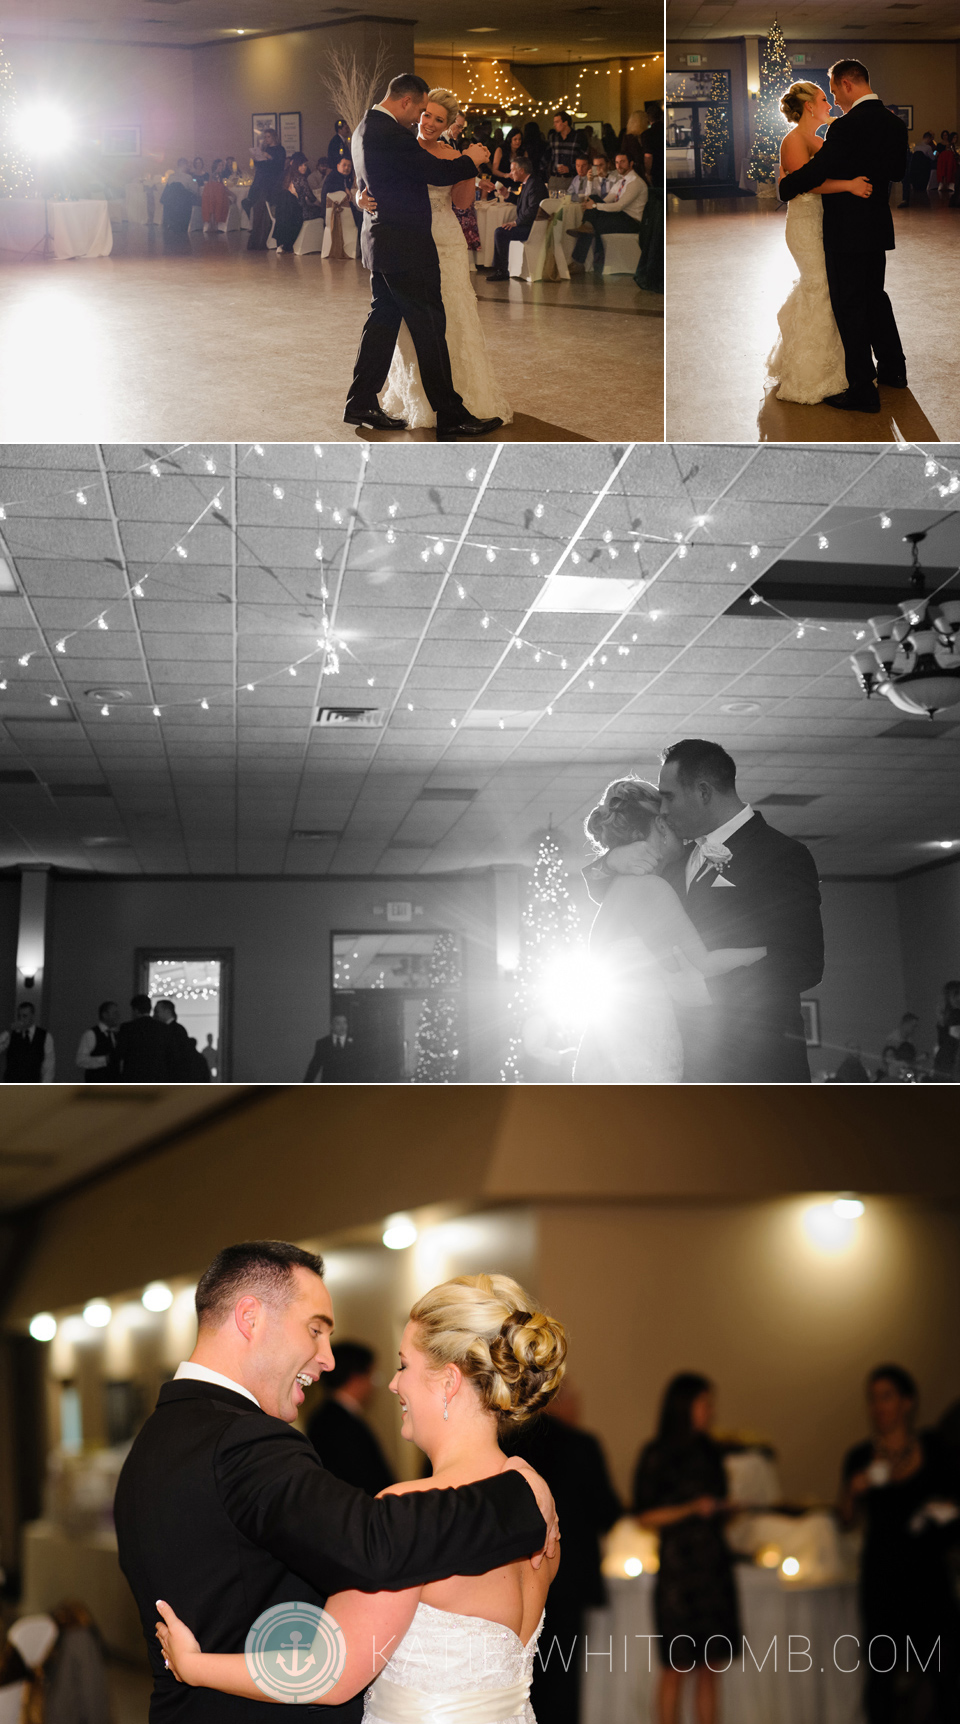 Bride & Groom's first dance at a winter wedding in South Bend, IN